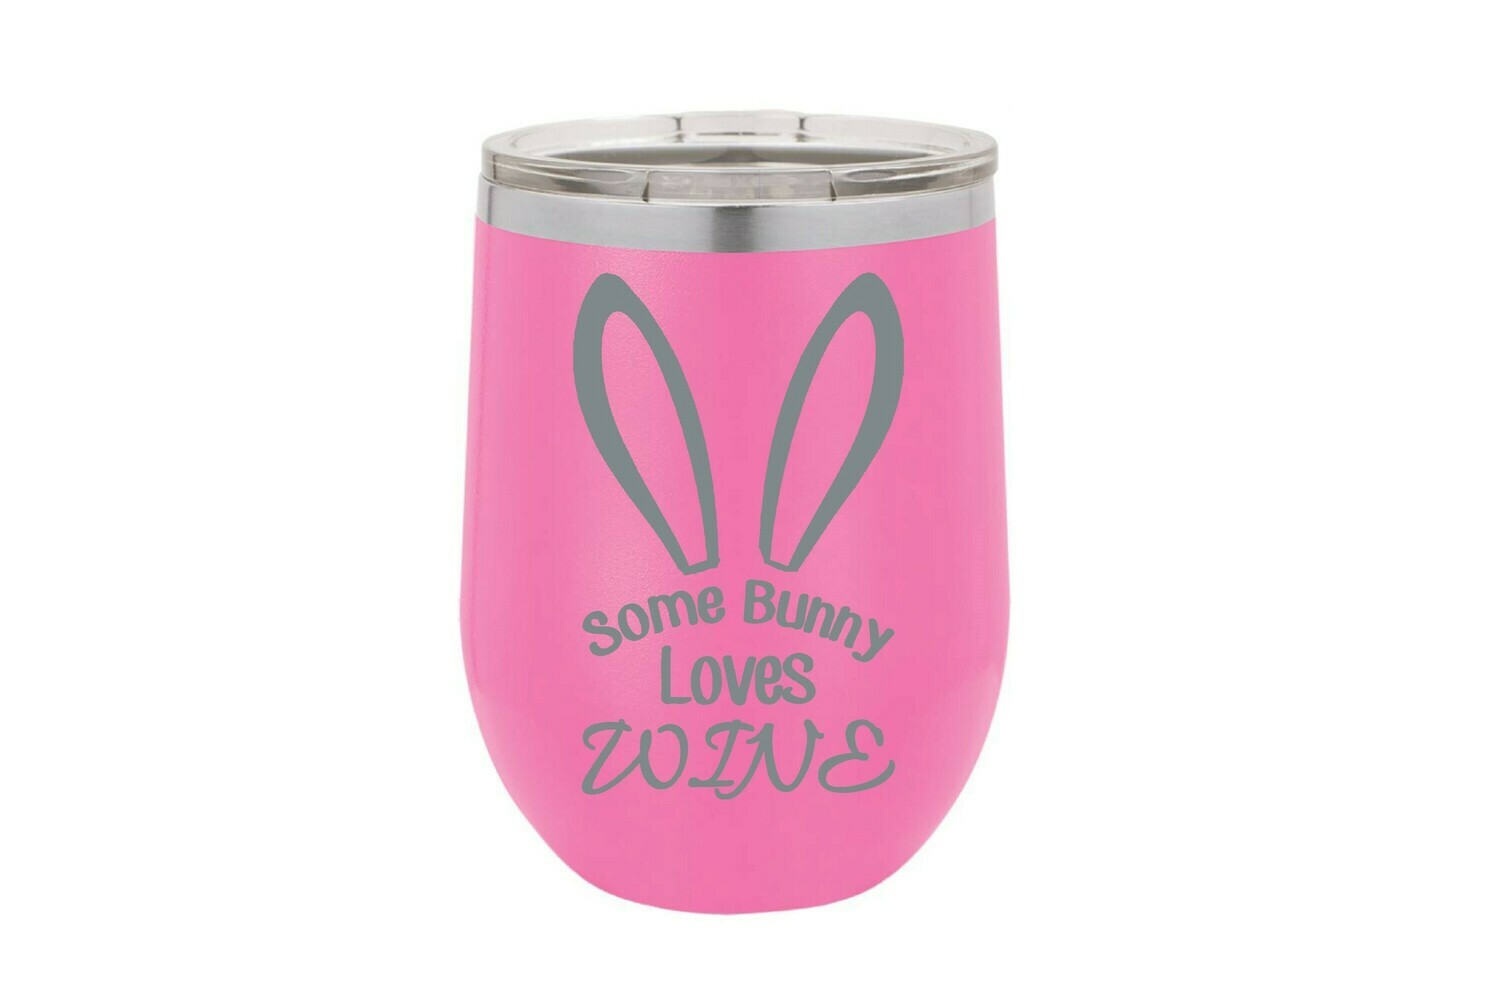 Some Bunny Loves Wine Insulated Tumbler 12 oz